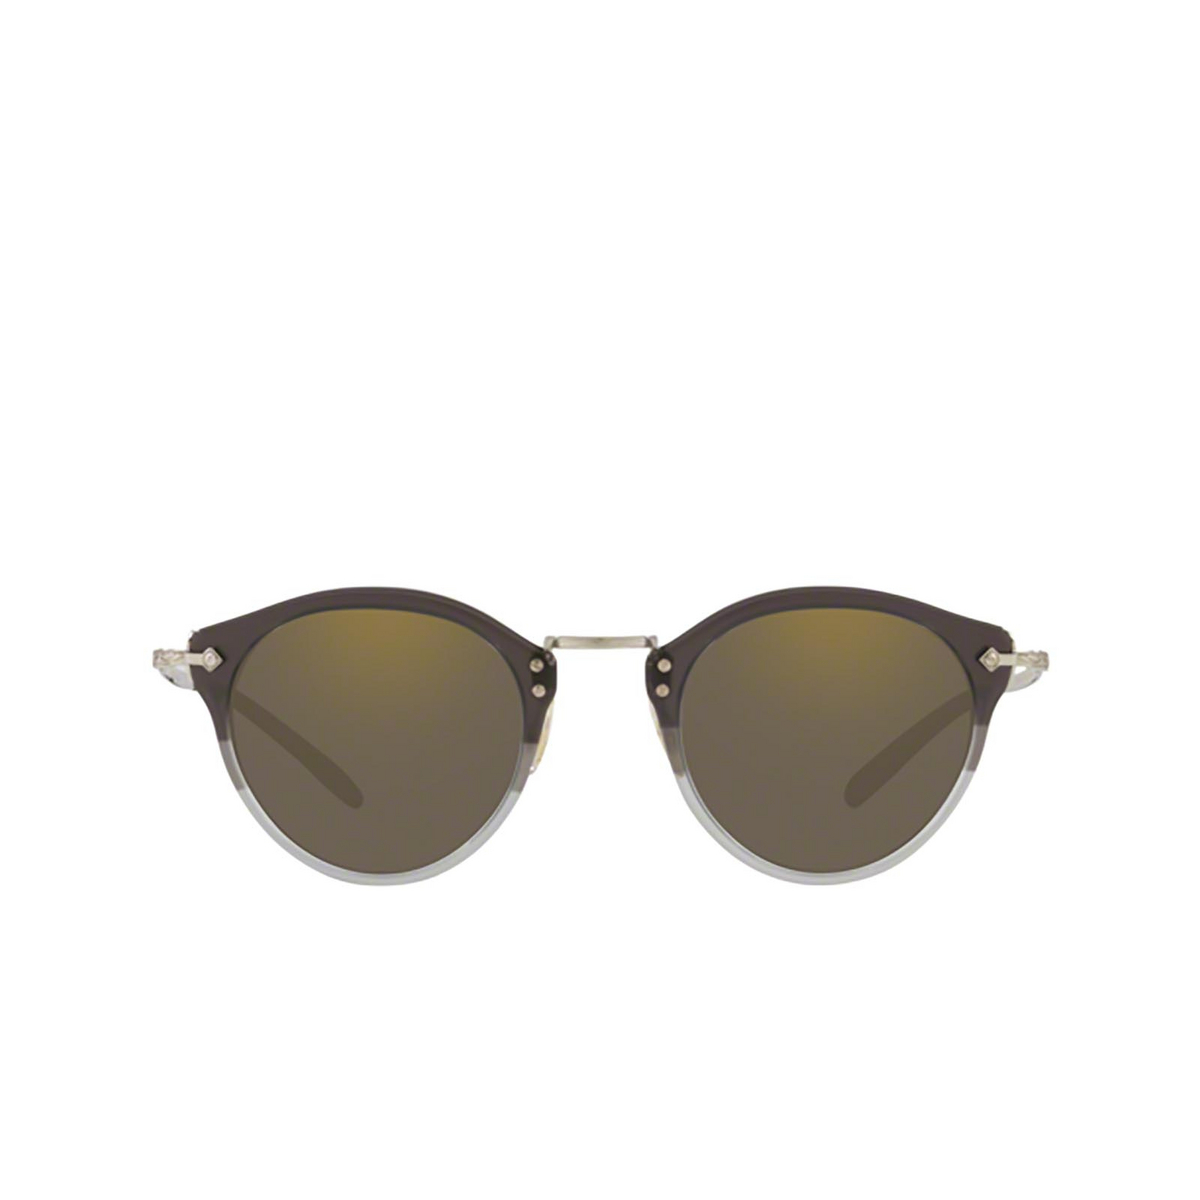 Oliver Peoples OP-505 Sunglasses 143639 - front view